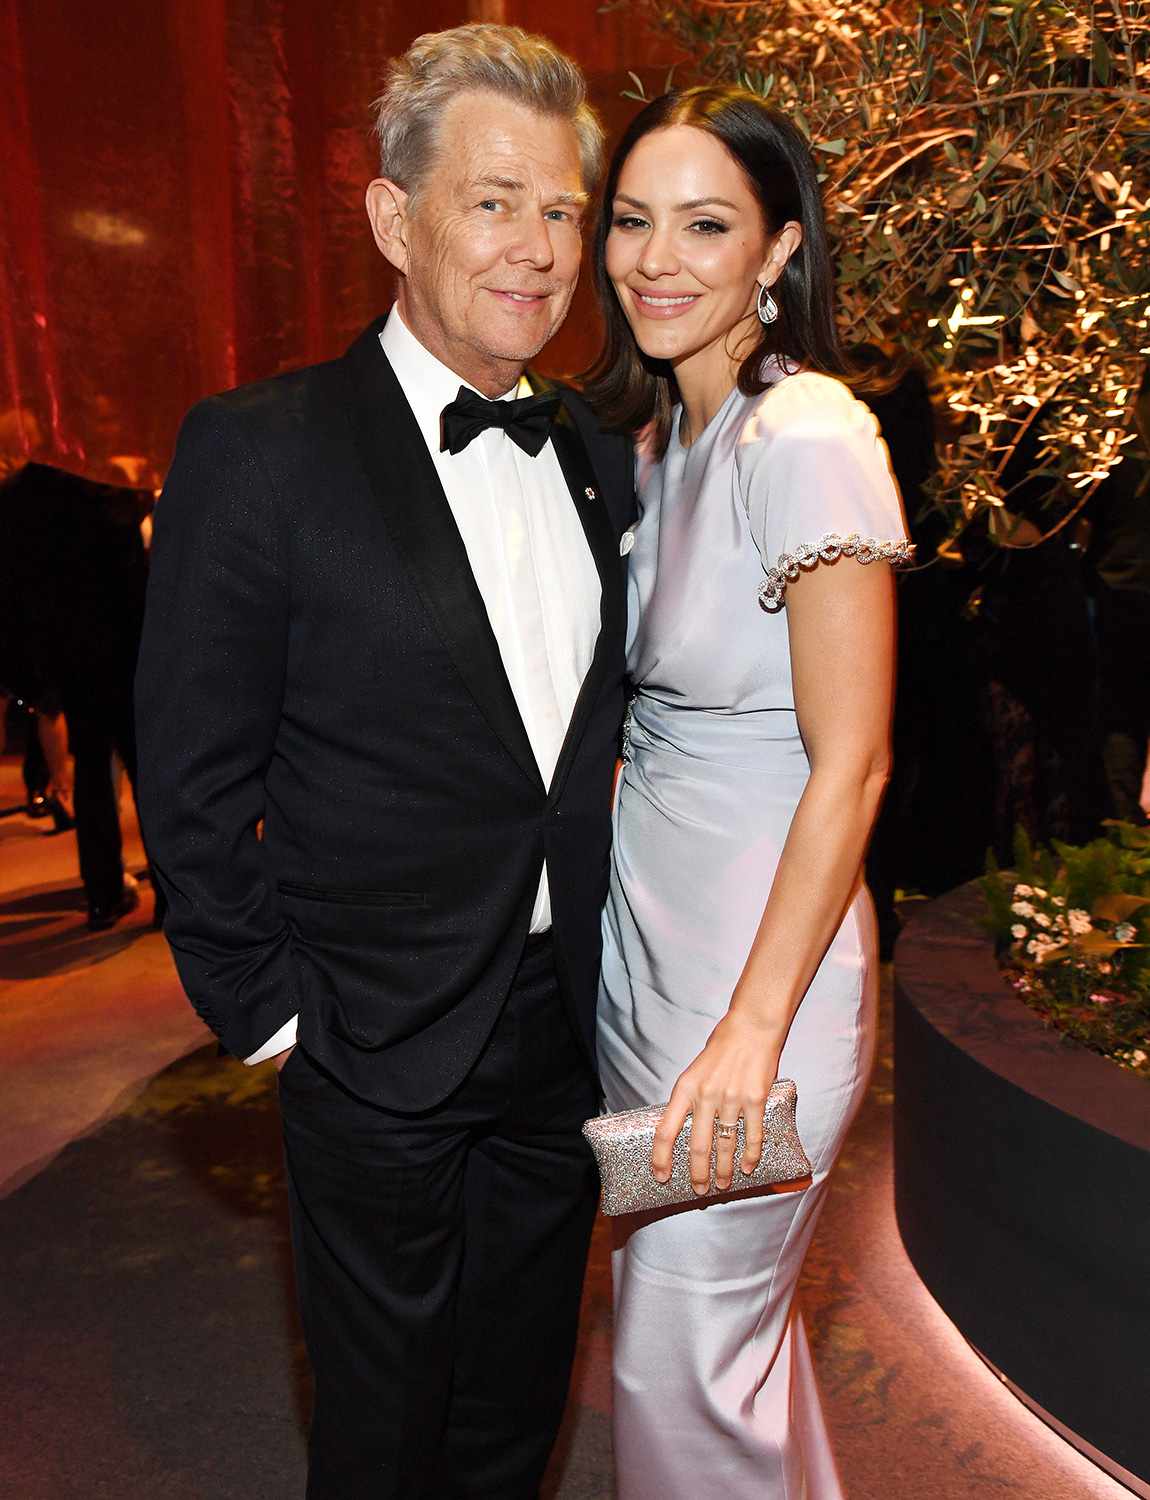 David Foster and Katharine McPhee attend the 2020 Vanity Fair Oscar Party hosted by Radhika Jones at Wallis Annenberg Center for the Performing Arts on February 09, 2020 in Beverly Hills, California